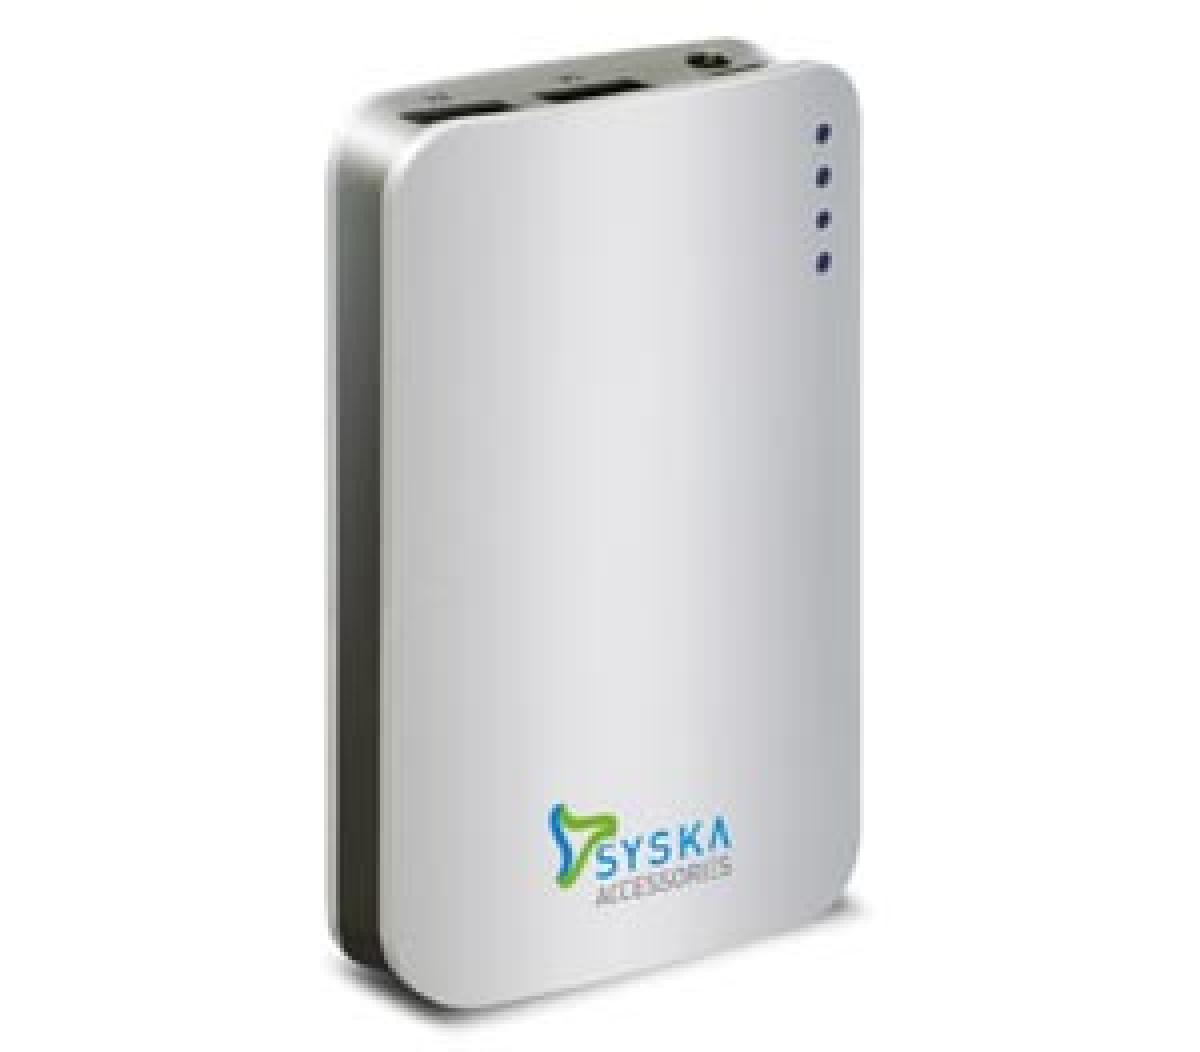 Syska unveils India’s first Qualcomm Quick charge power bank